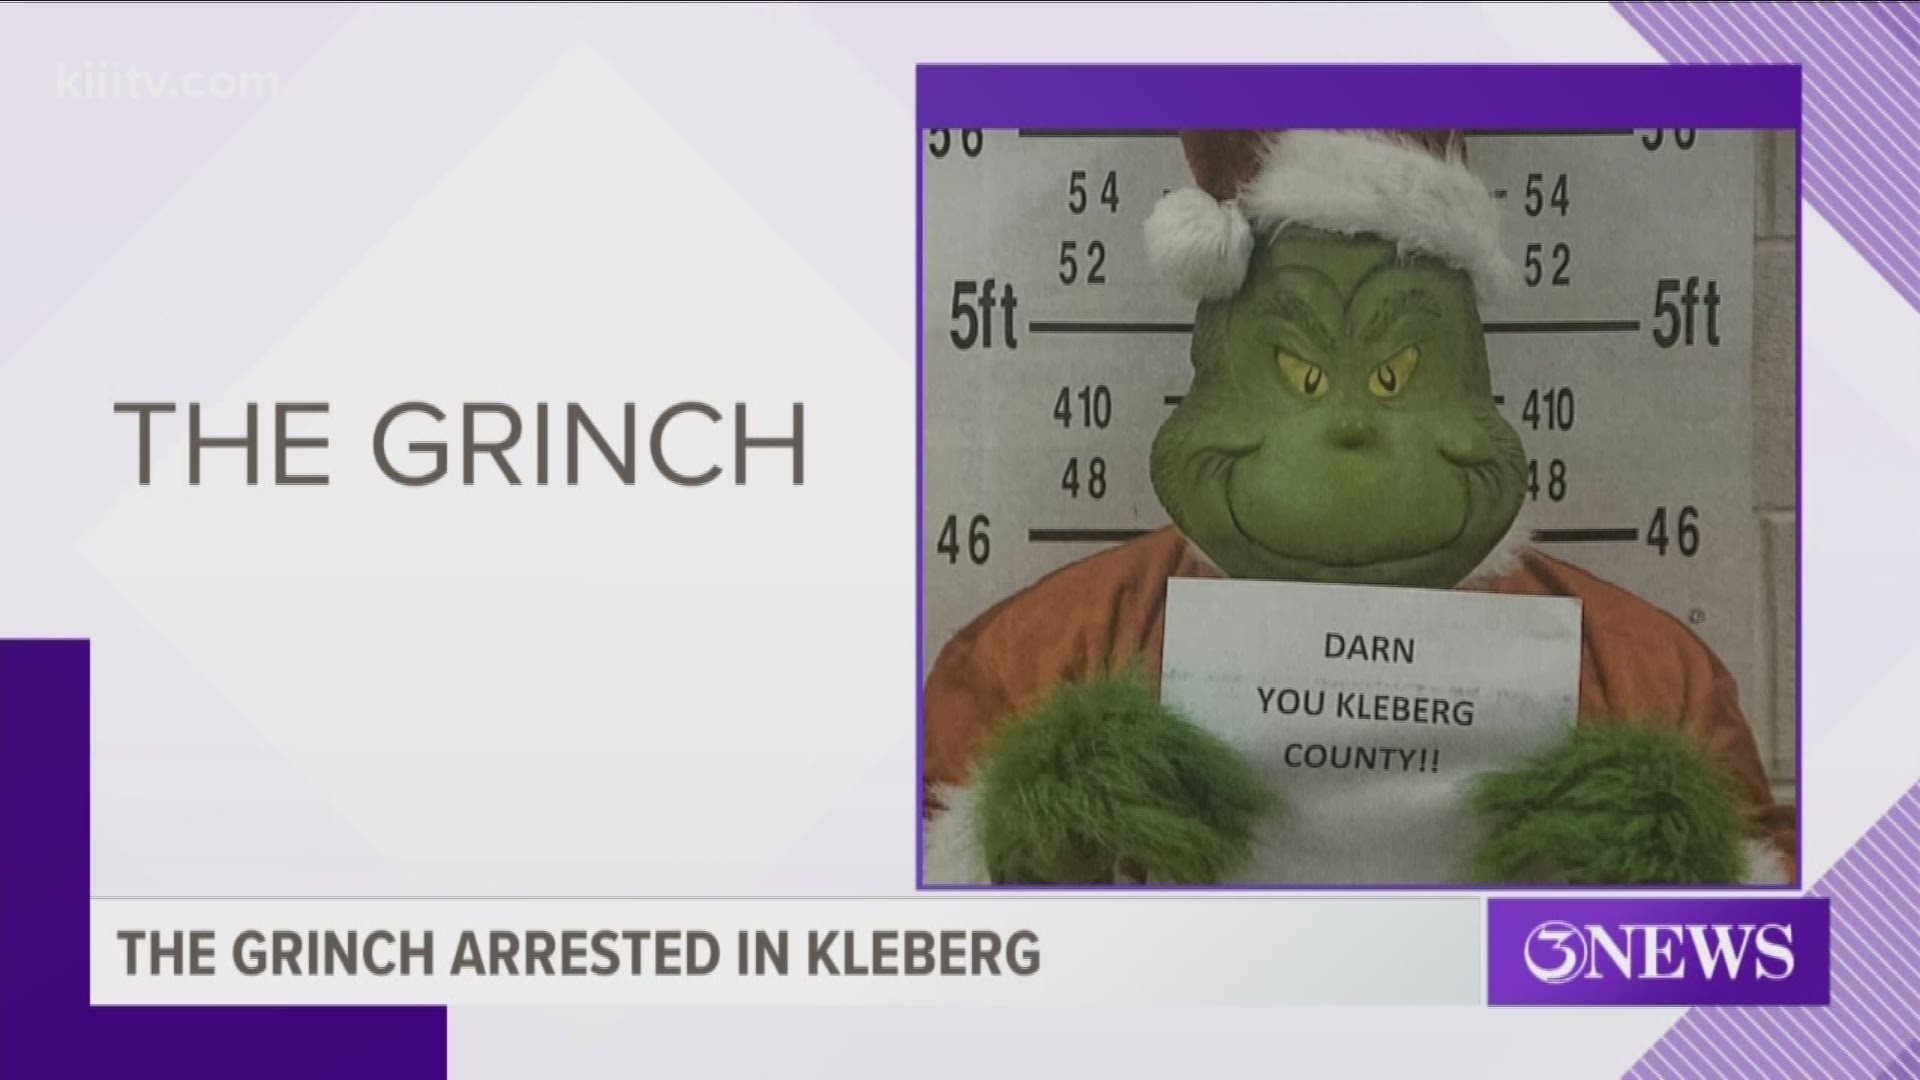 The Kleberg County Sheriff's Office has foiled the Grinch's attempt to spoil Christmas, and they have the mugshot to prove it.